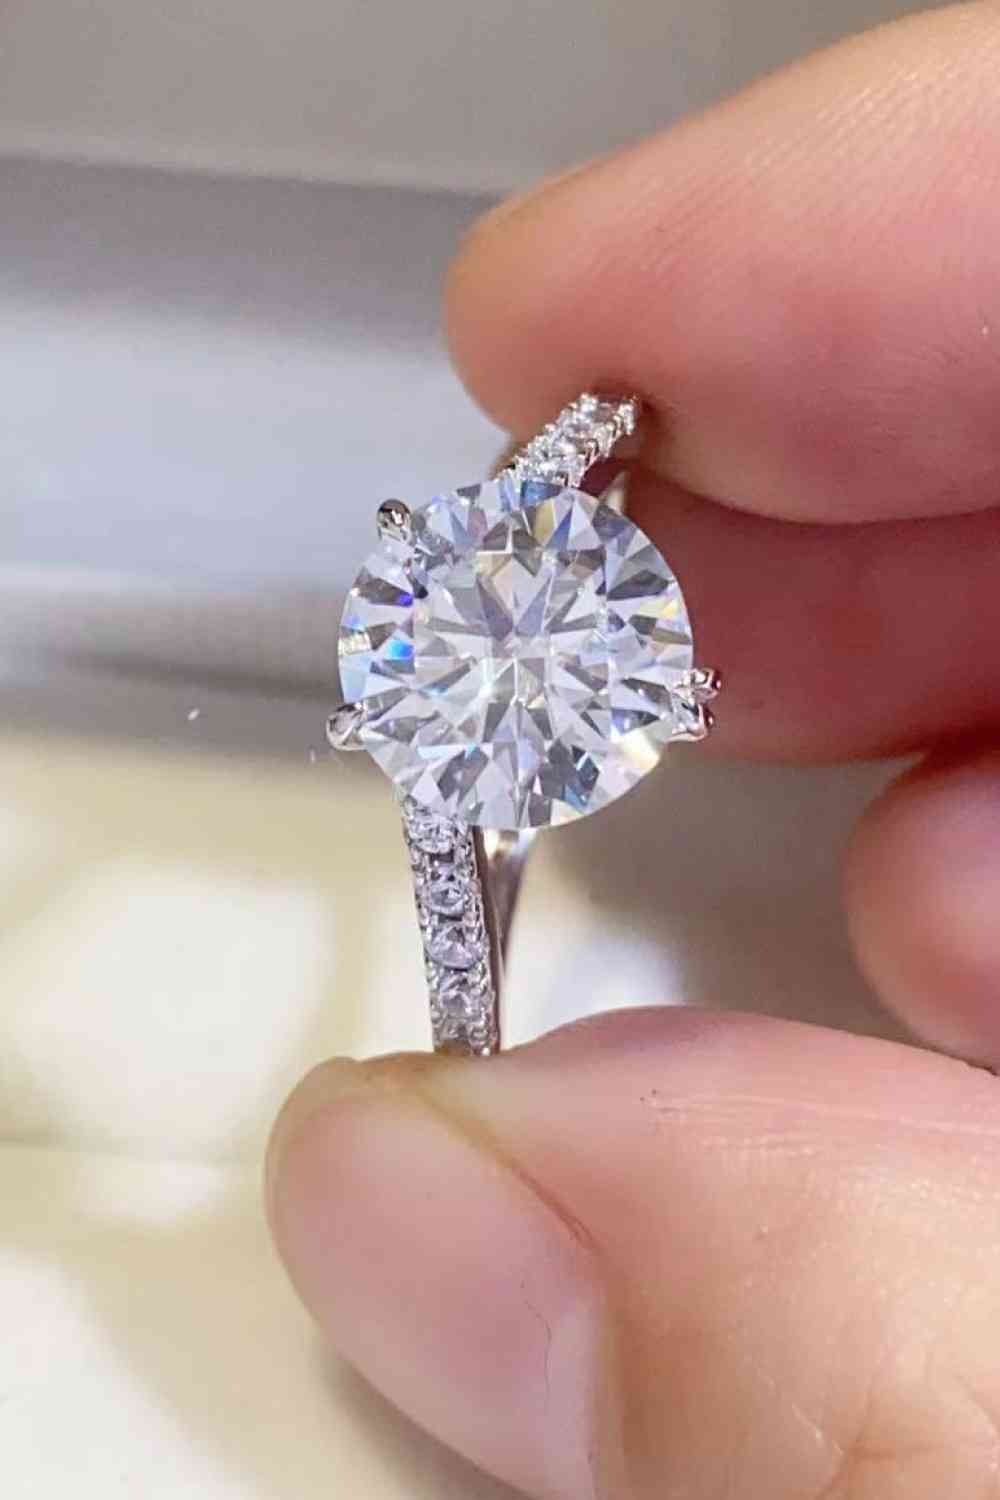 3 Carat Moissanite 925 Sterling Silver Ring - Shop Tophatter Deals, Electronics, Fashion, Jewelry, Health, Beauty, Home Decor, Free Shipping